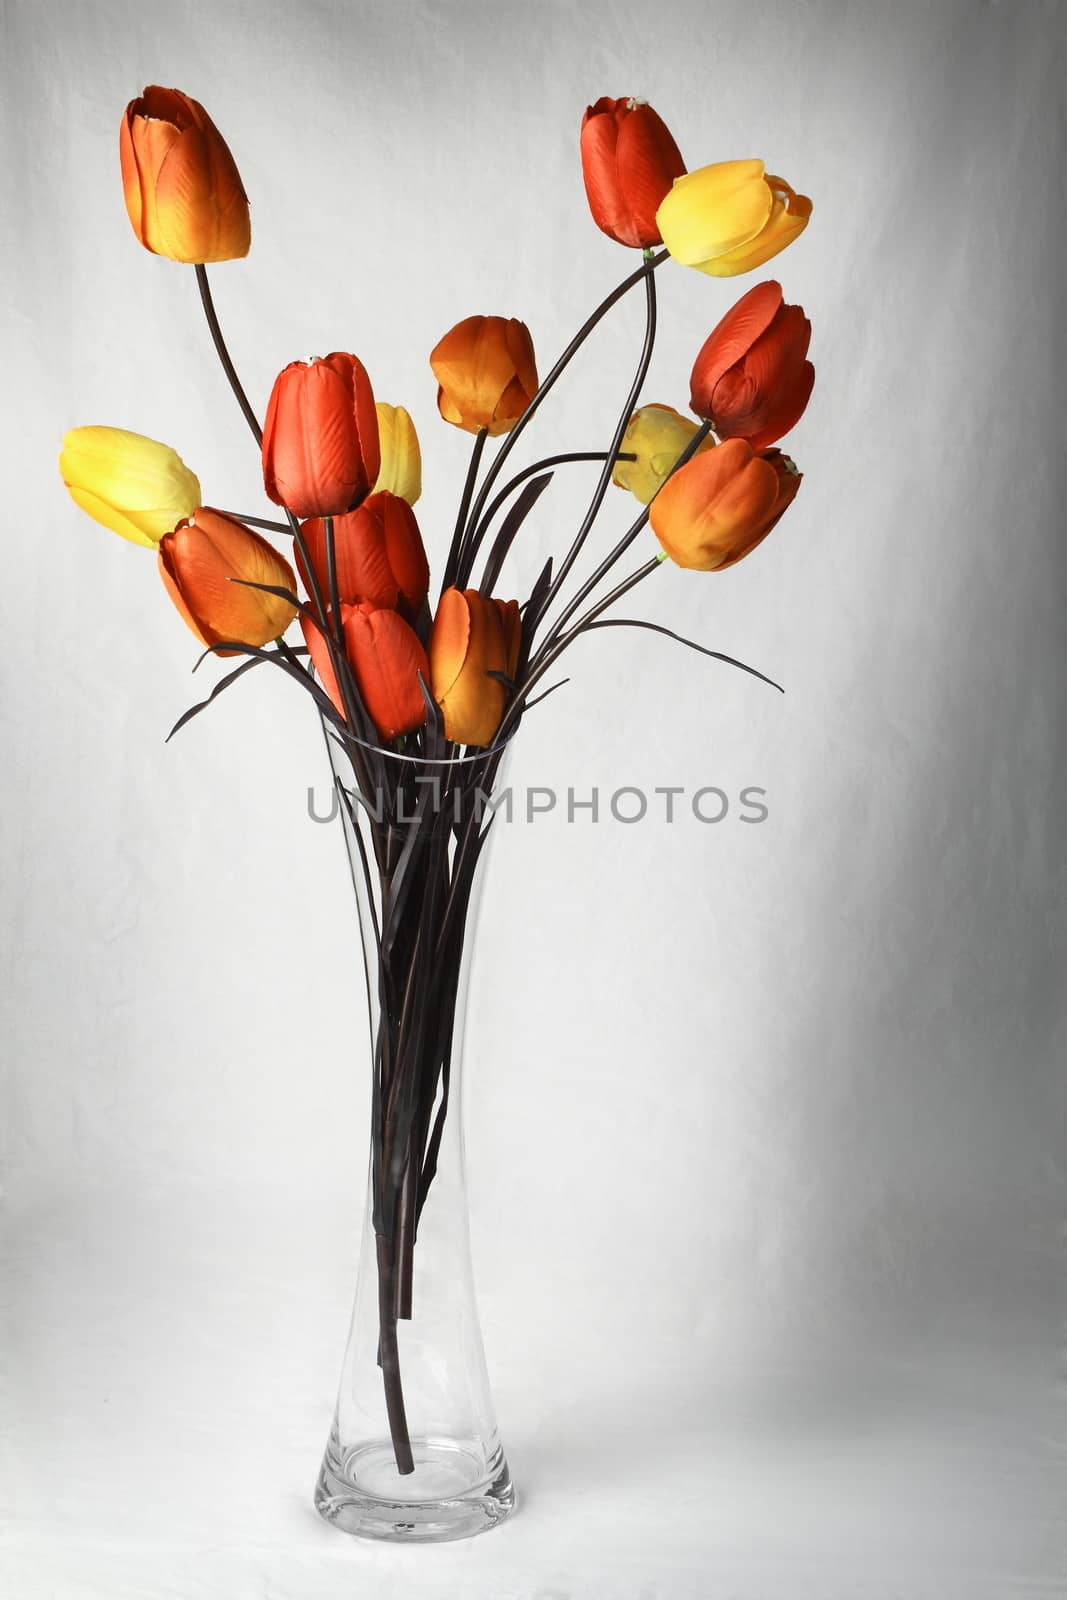 Flowers in a Vase by selinsmo